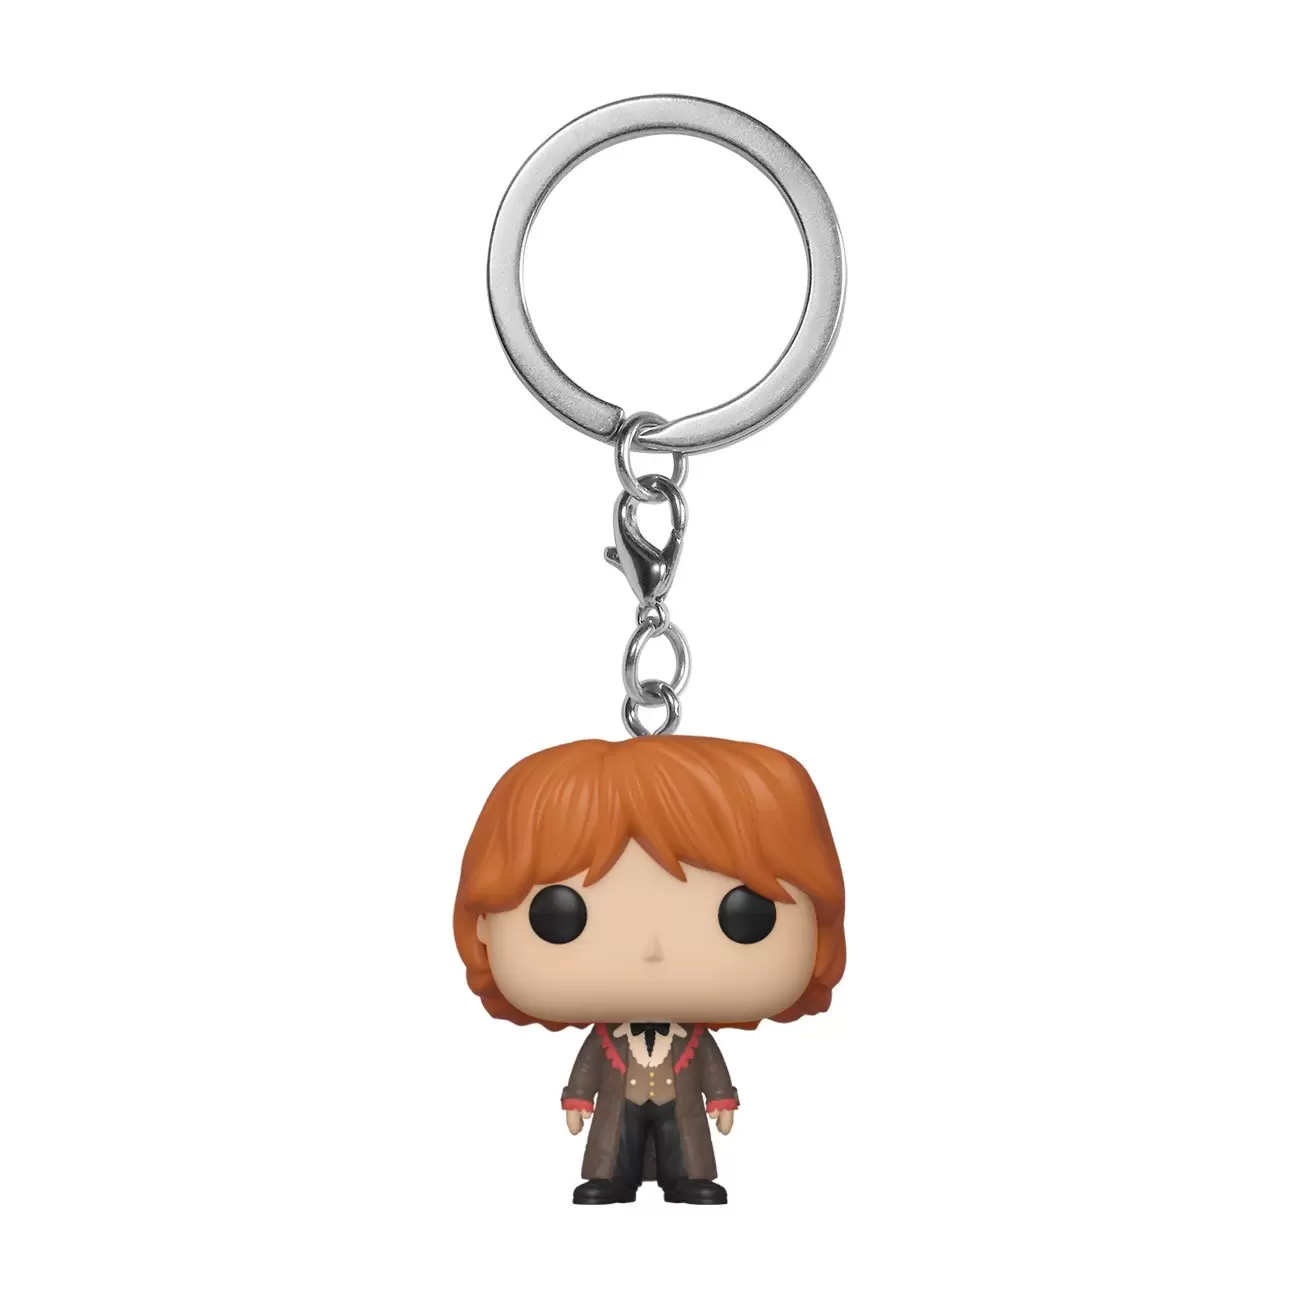 Harry Potter and Fantastic Beasts - POP! Keychain - Ron Weasley